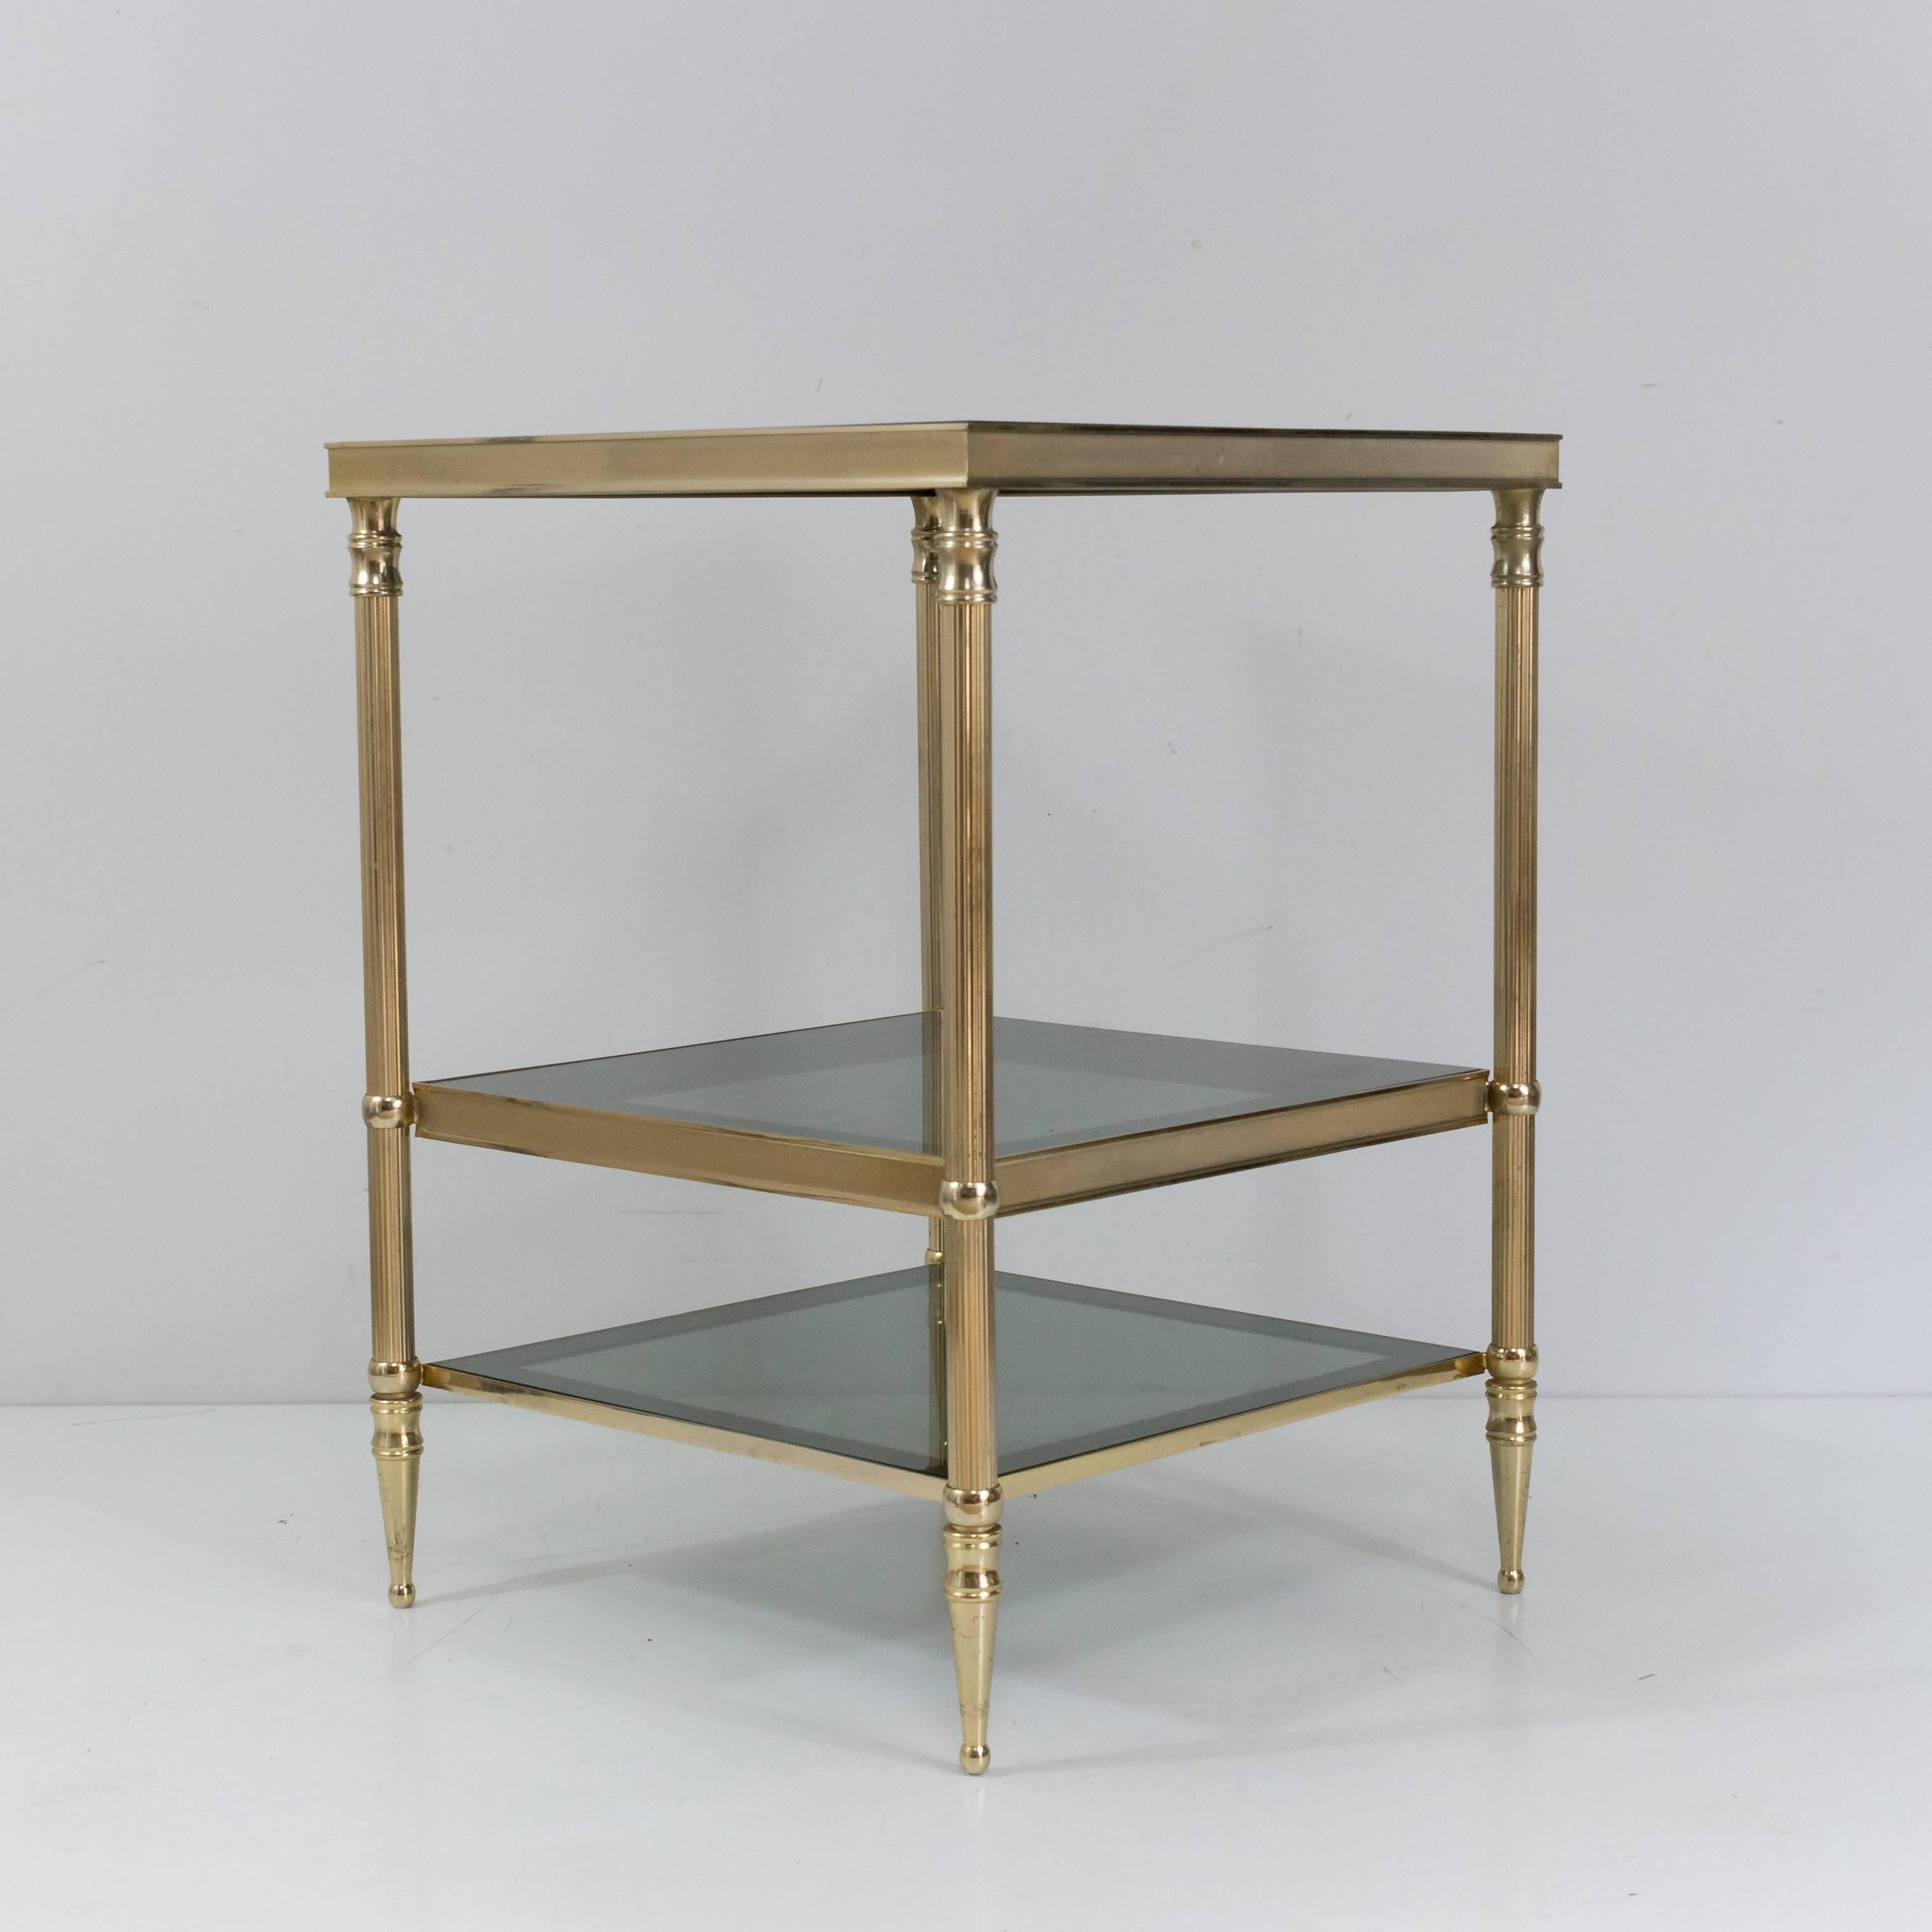 Handsome pair of three-tiered brass side tables with glass shelves. In the style of Maison Jansen. French, 1960s.

These side tables are currently in France, please allow 2 to 4 weeks for delivery. Shipping to our warehouse in New York is included